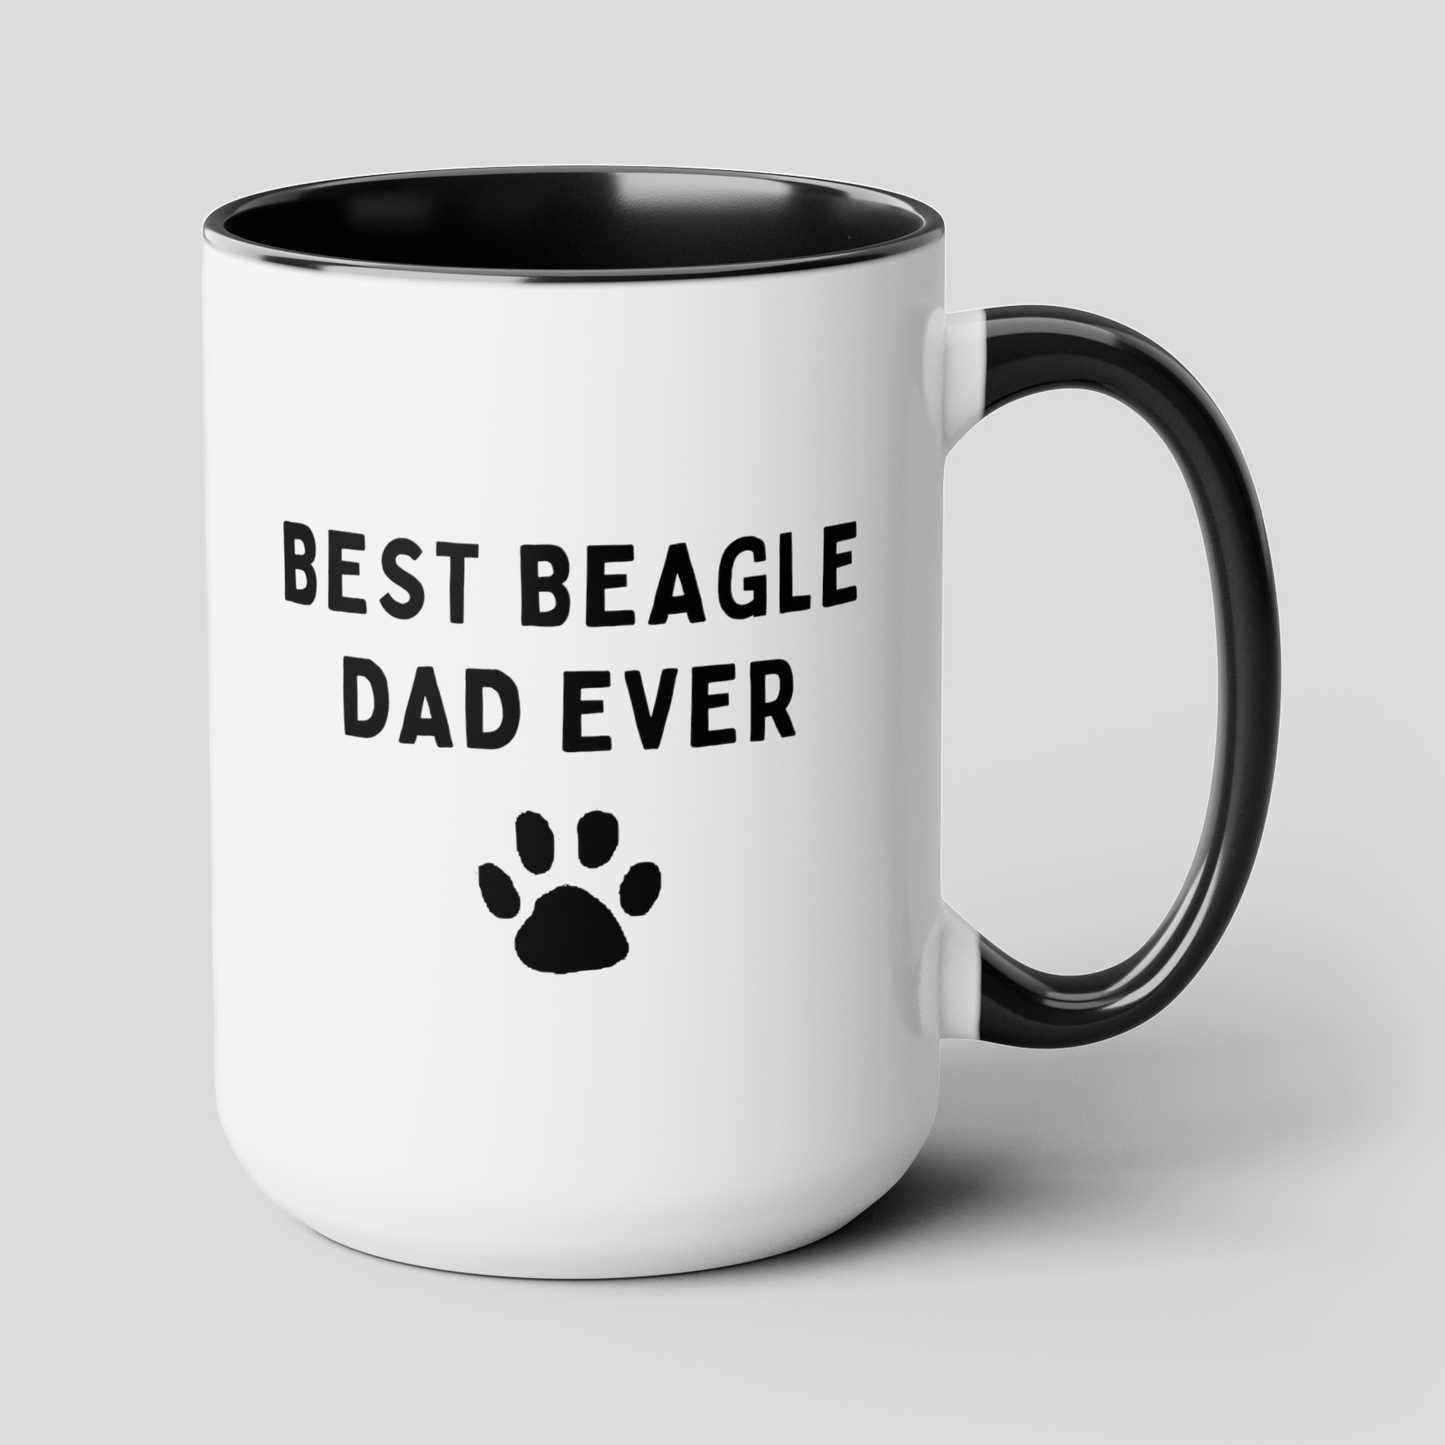 Best Beagle Dad Ever 15oz white with black accent funny large coffee mug gift for father's day him granddad dog lover pet owner furparent  waveywares wavey wares wavywares wavy wares cover